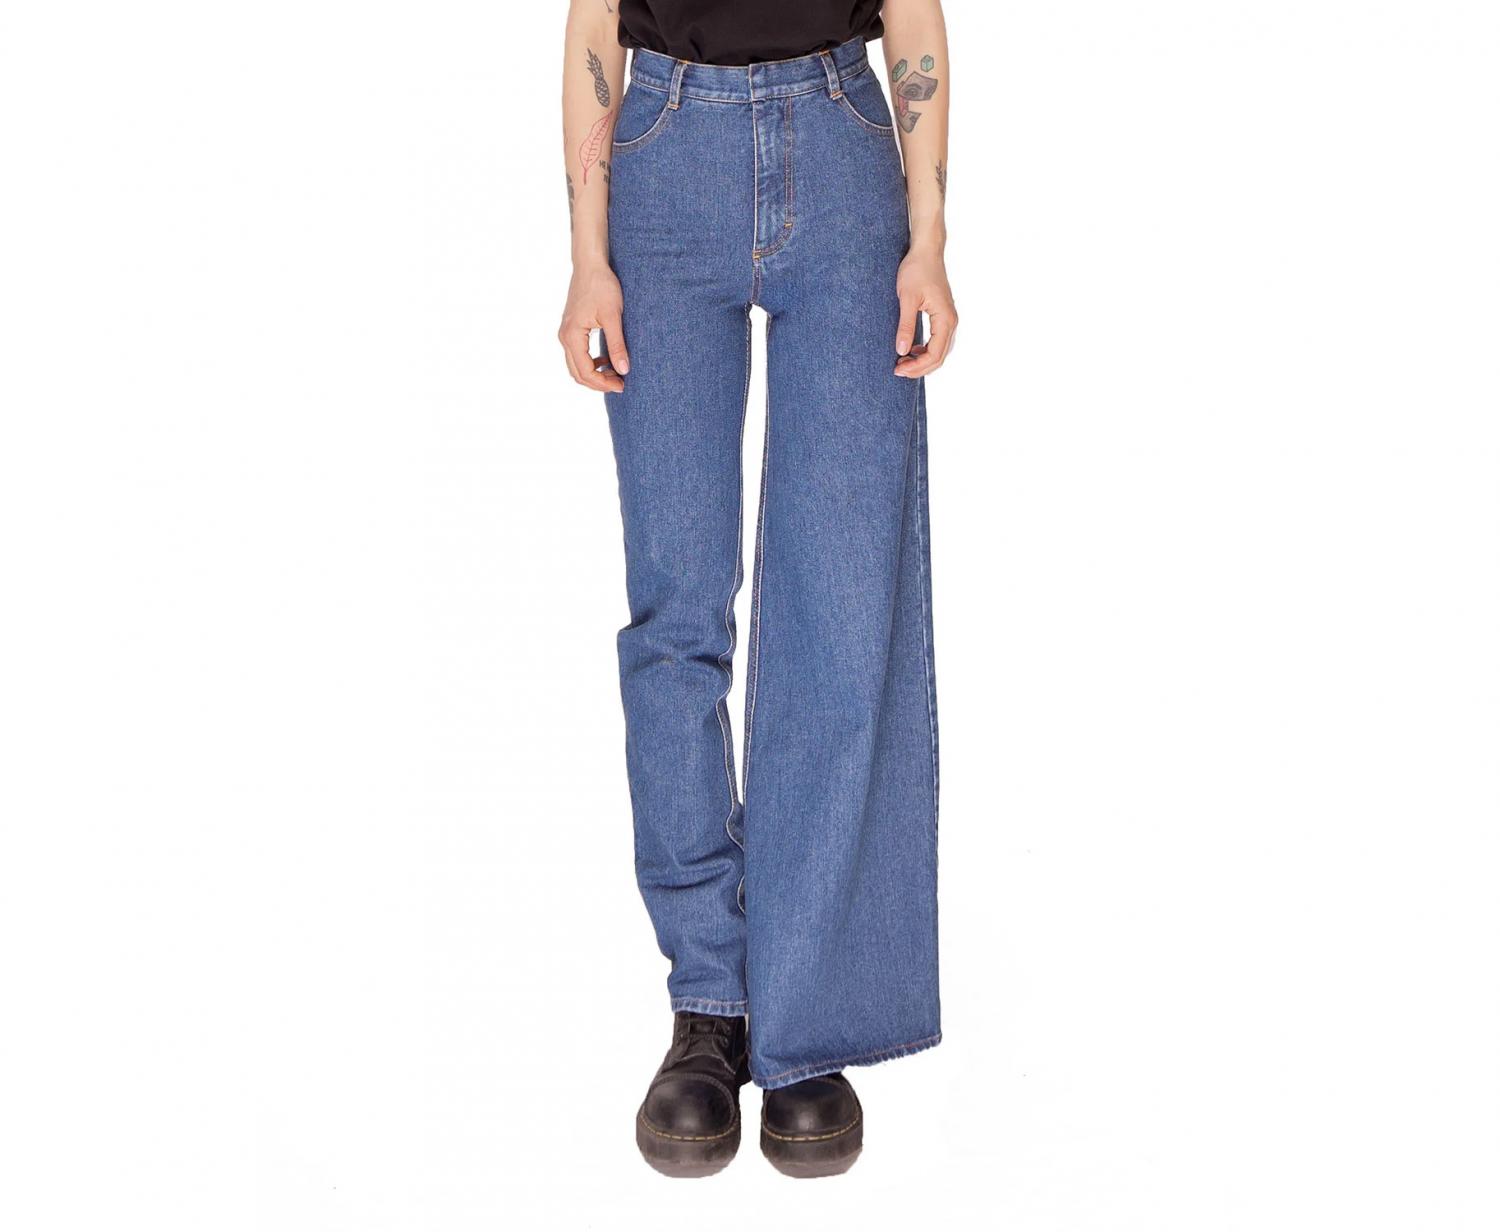 Ksenia Schnaider Asymmetrical Skinny and Wide Leg Jeans - Double-style jeans